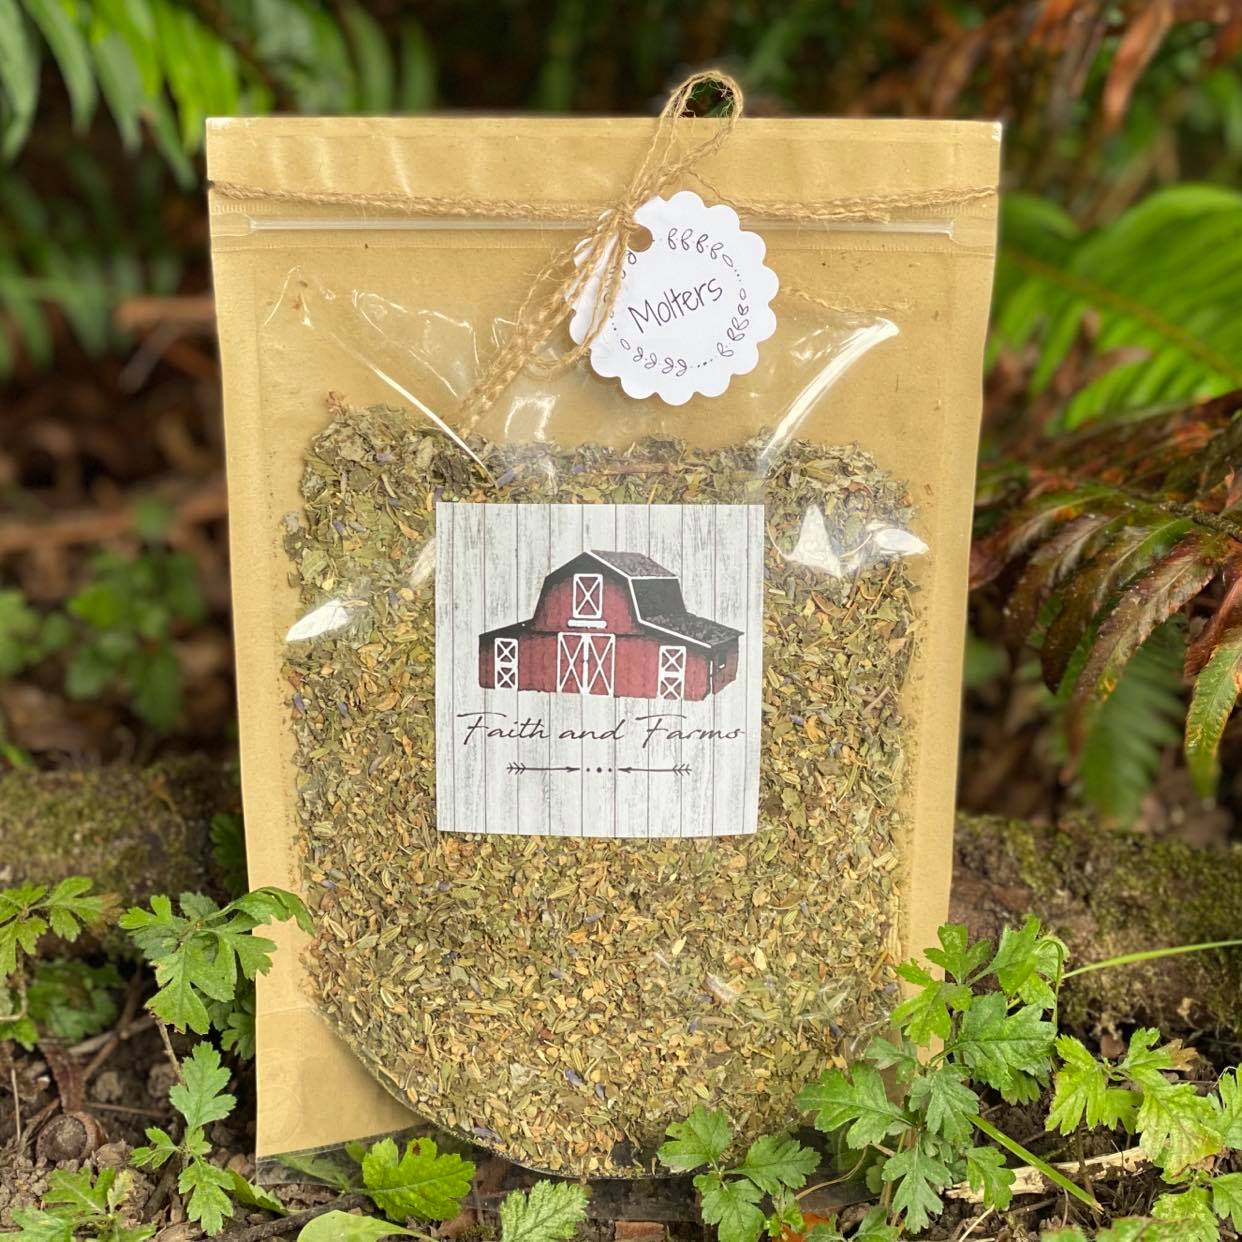 Herbin' Molters - Herbs for Healthy Chickens